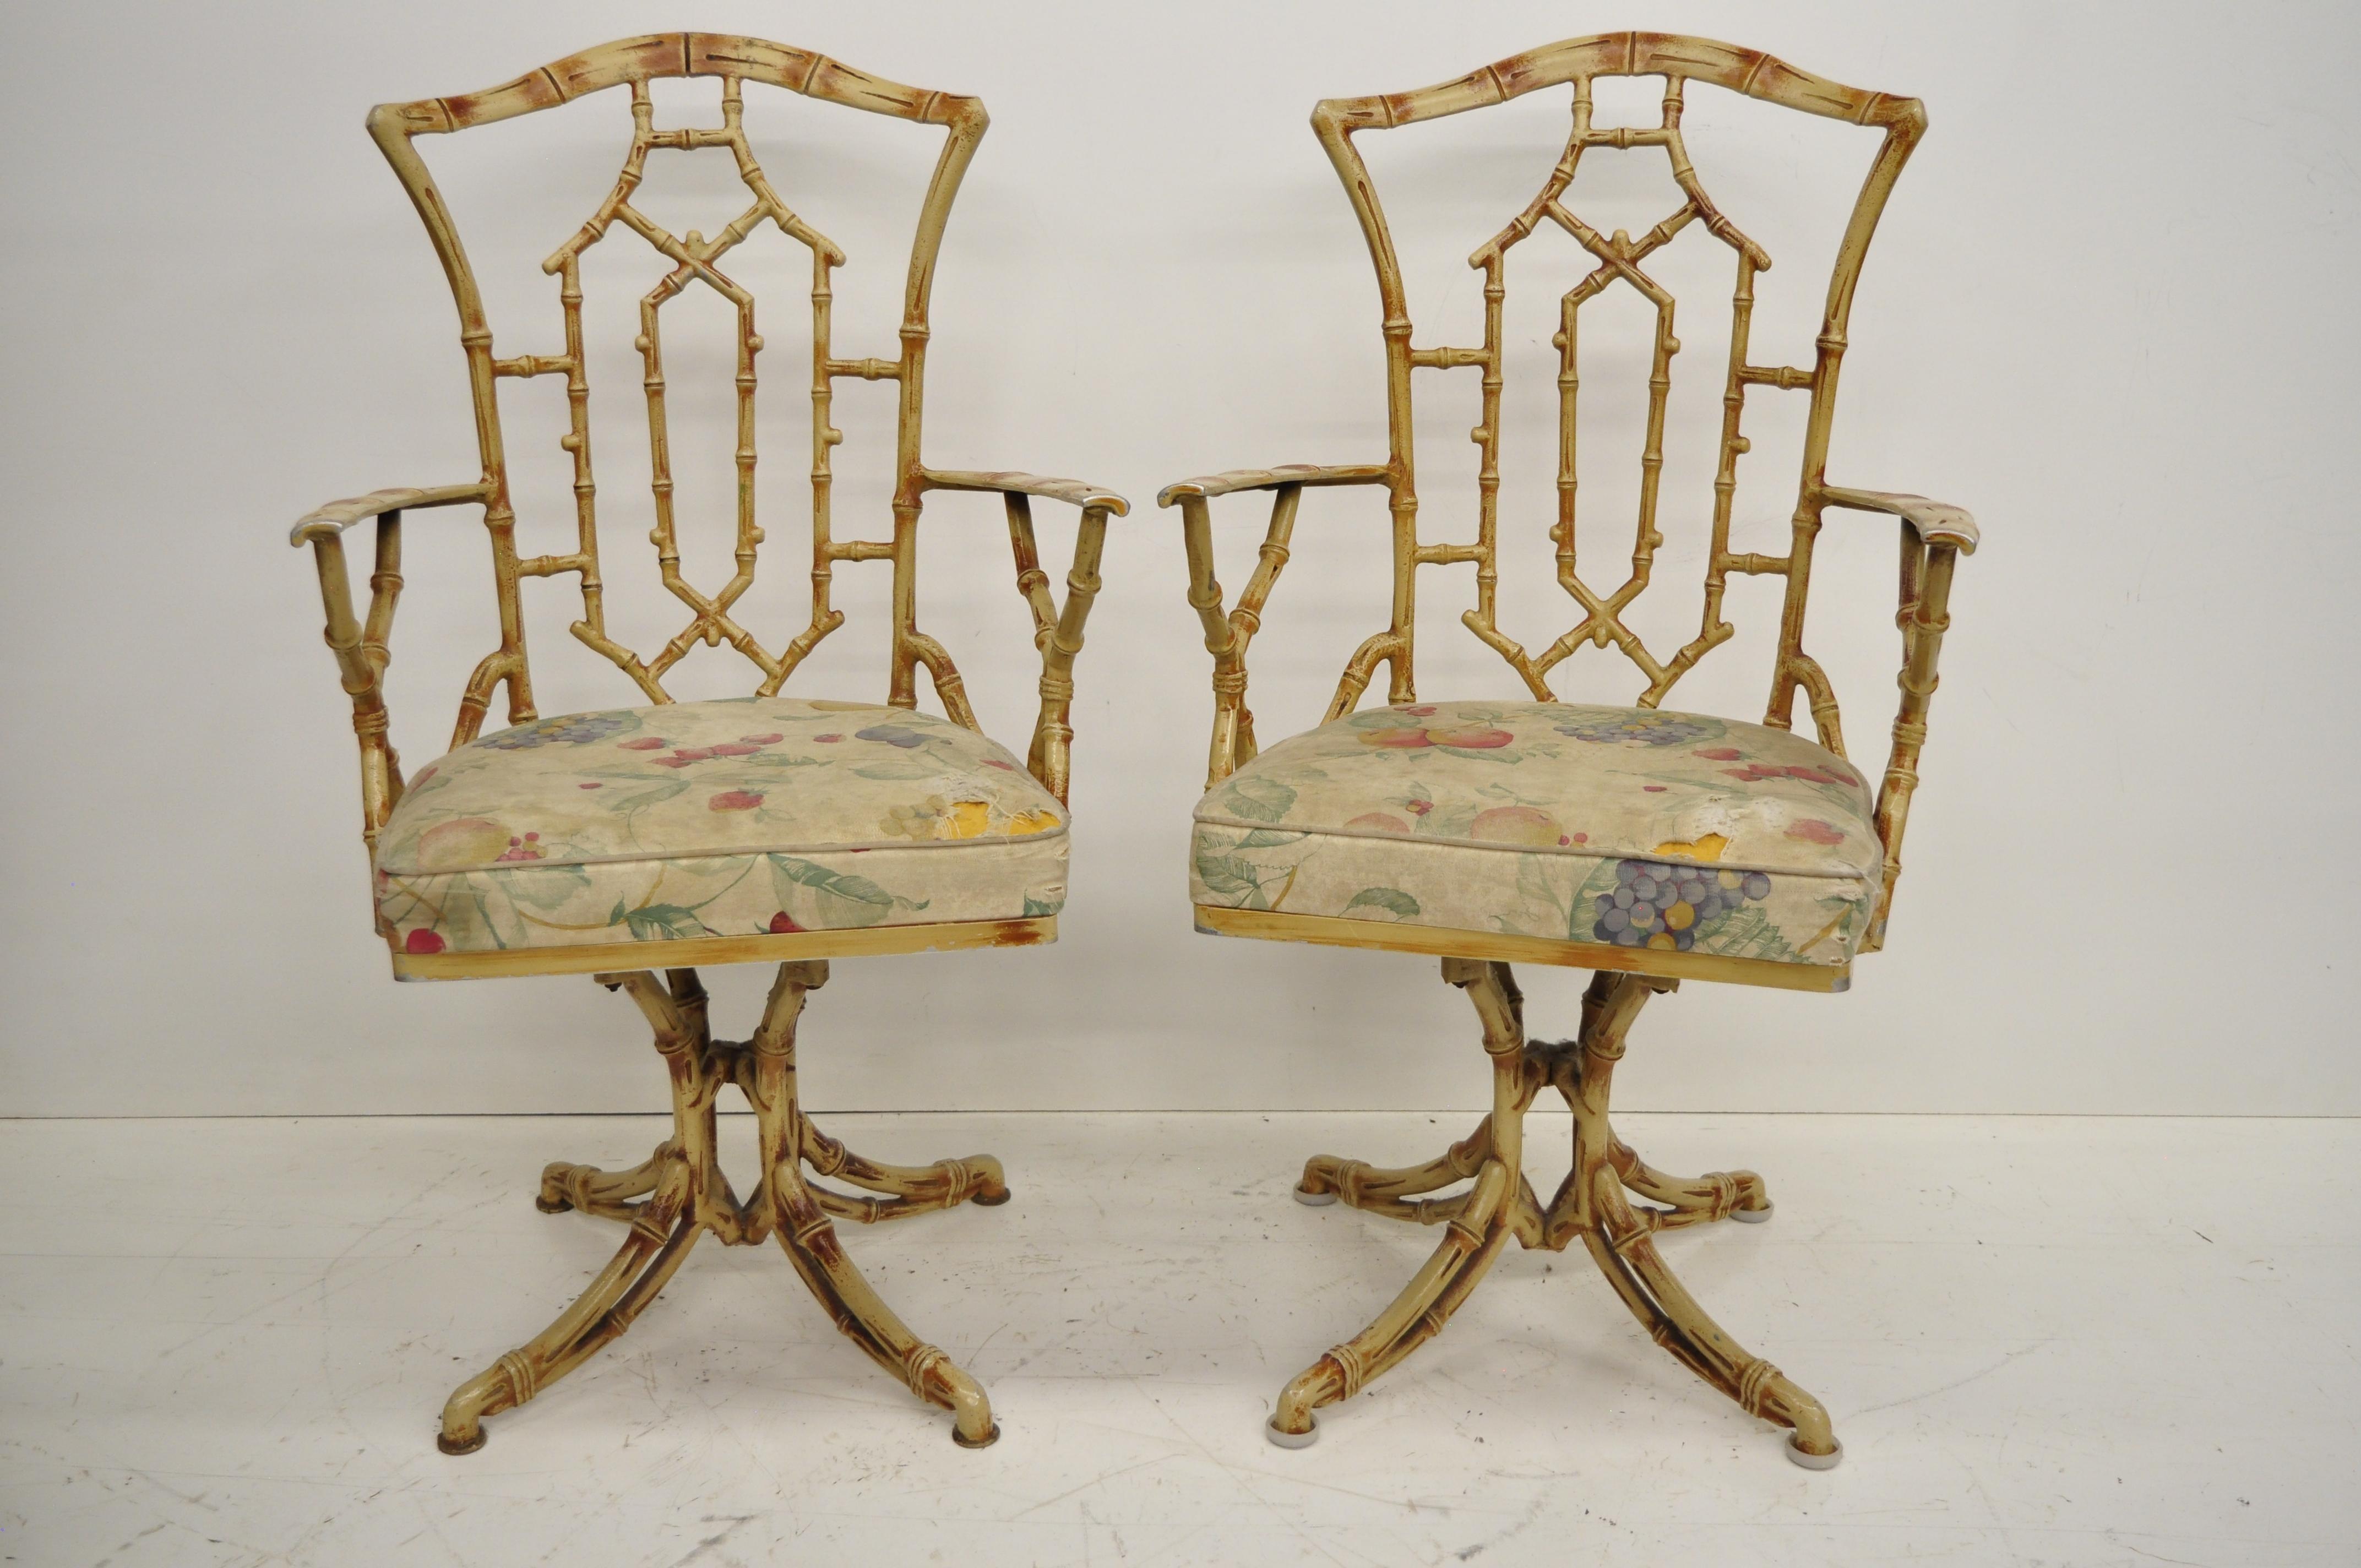 Vintage metal faux bamboo Hollywood Regency / Chinese Chippendale style five-piece dining set with swivel chairs. Listing features two armchairs, two side chairs, pedestal base table with round smoked glass top, swivel seats, yellow finish, great